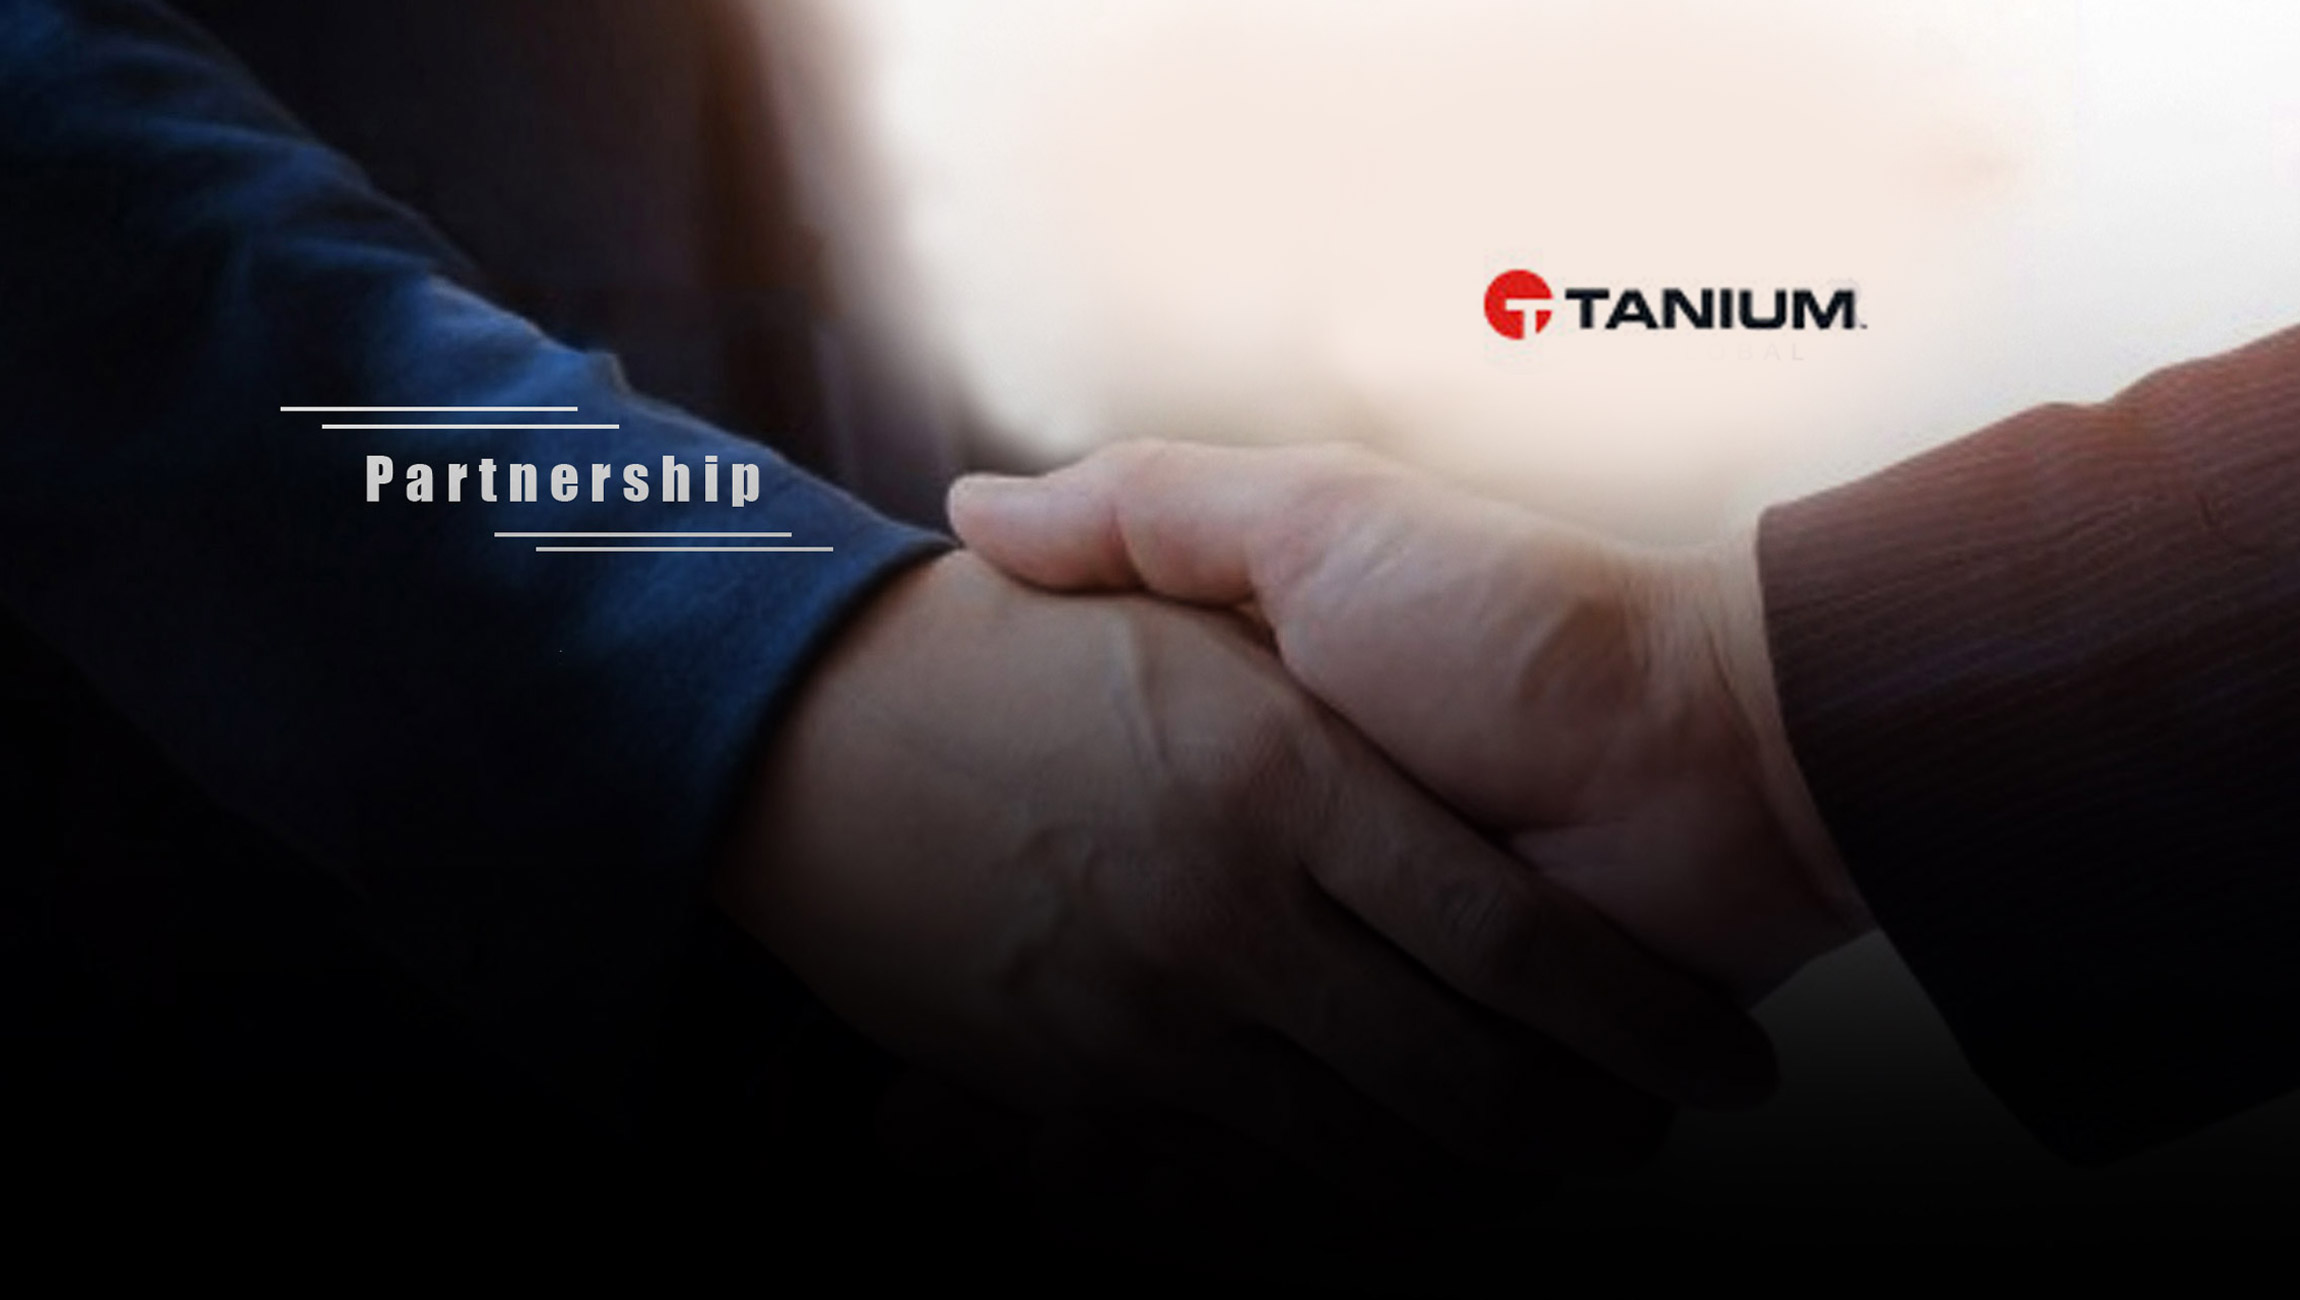 Tanium Expands Partnership With vArmour, Minimizes Impact of Log4j With Actionable Observability